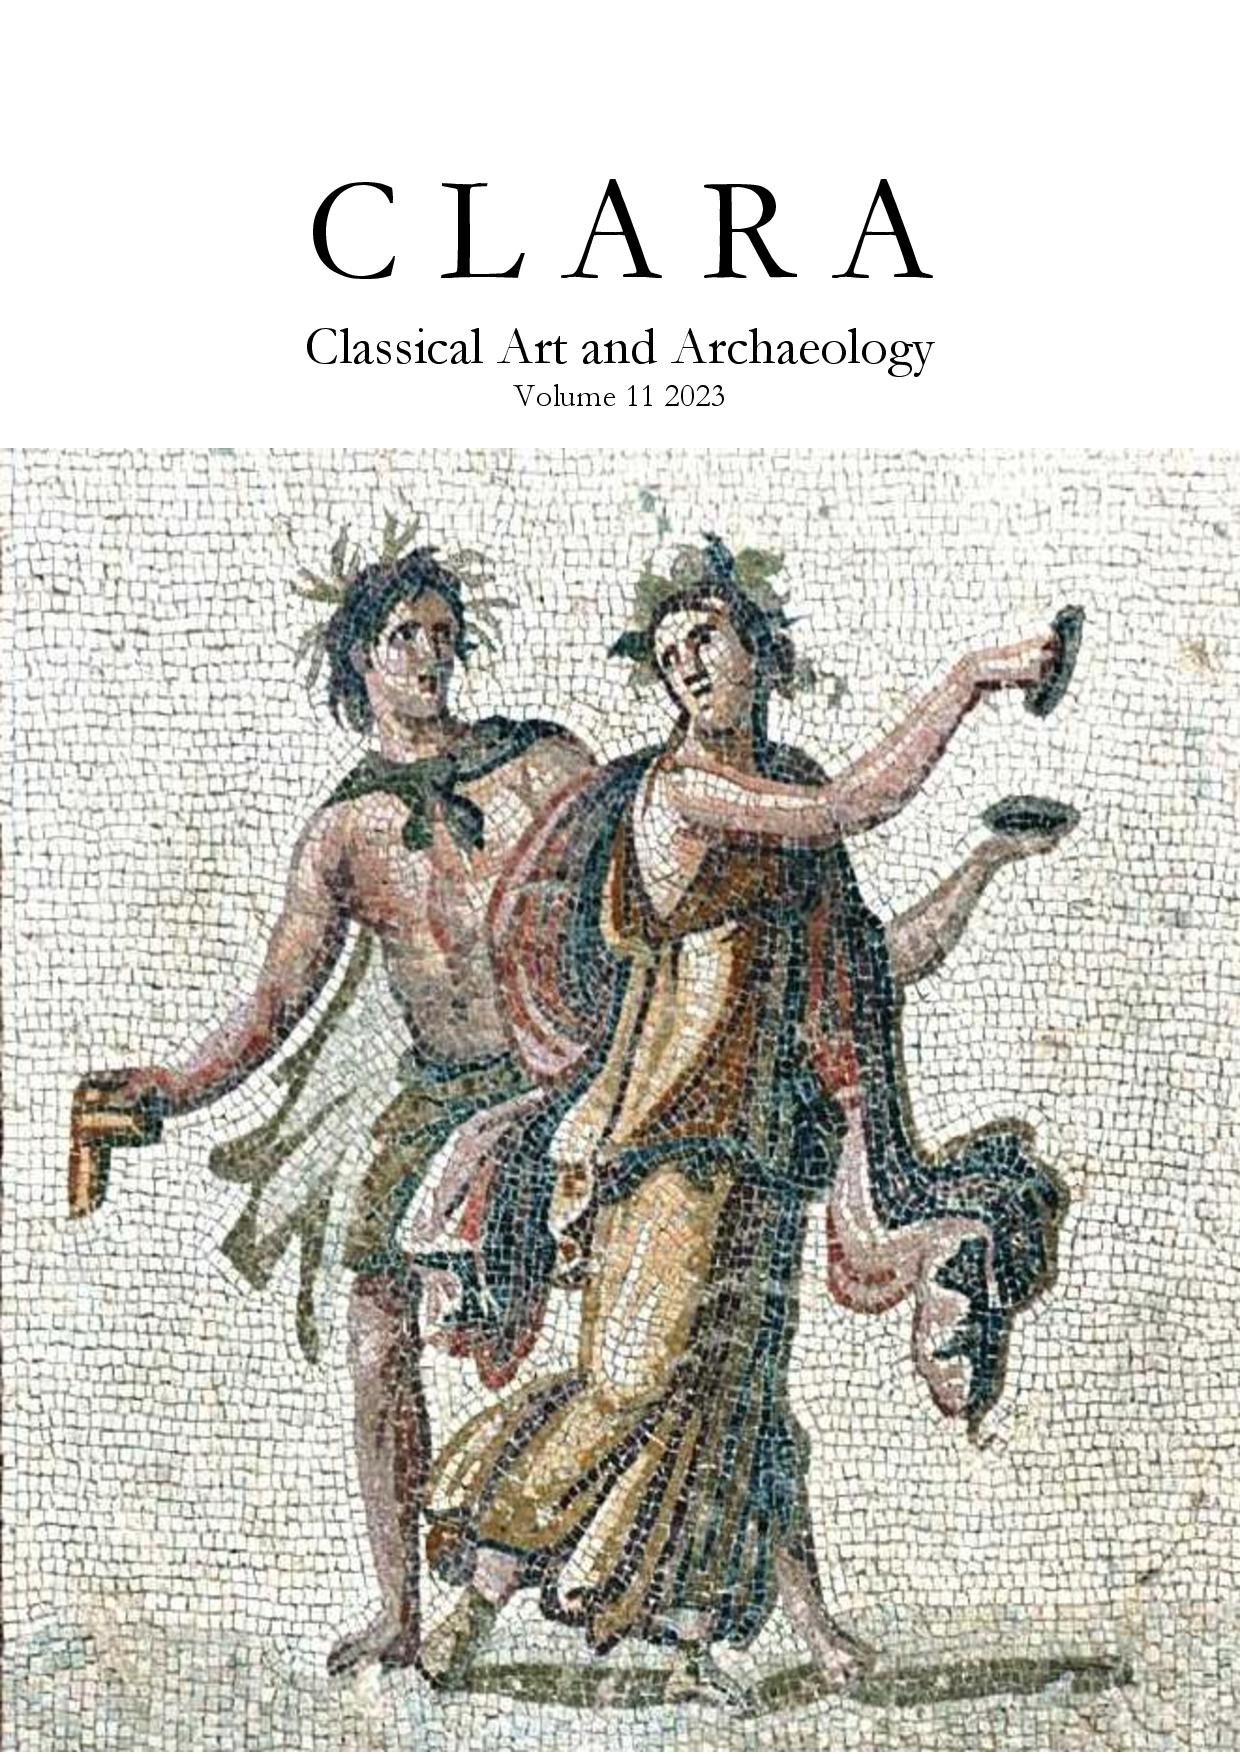 					View Vol. 11 (2023): CLARA: Classical Art and Archaeology
				